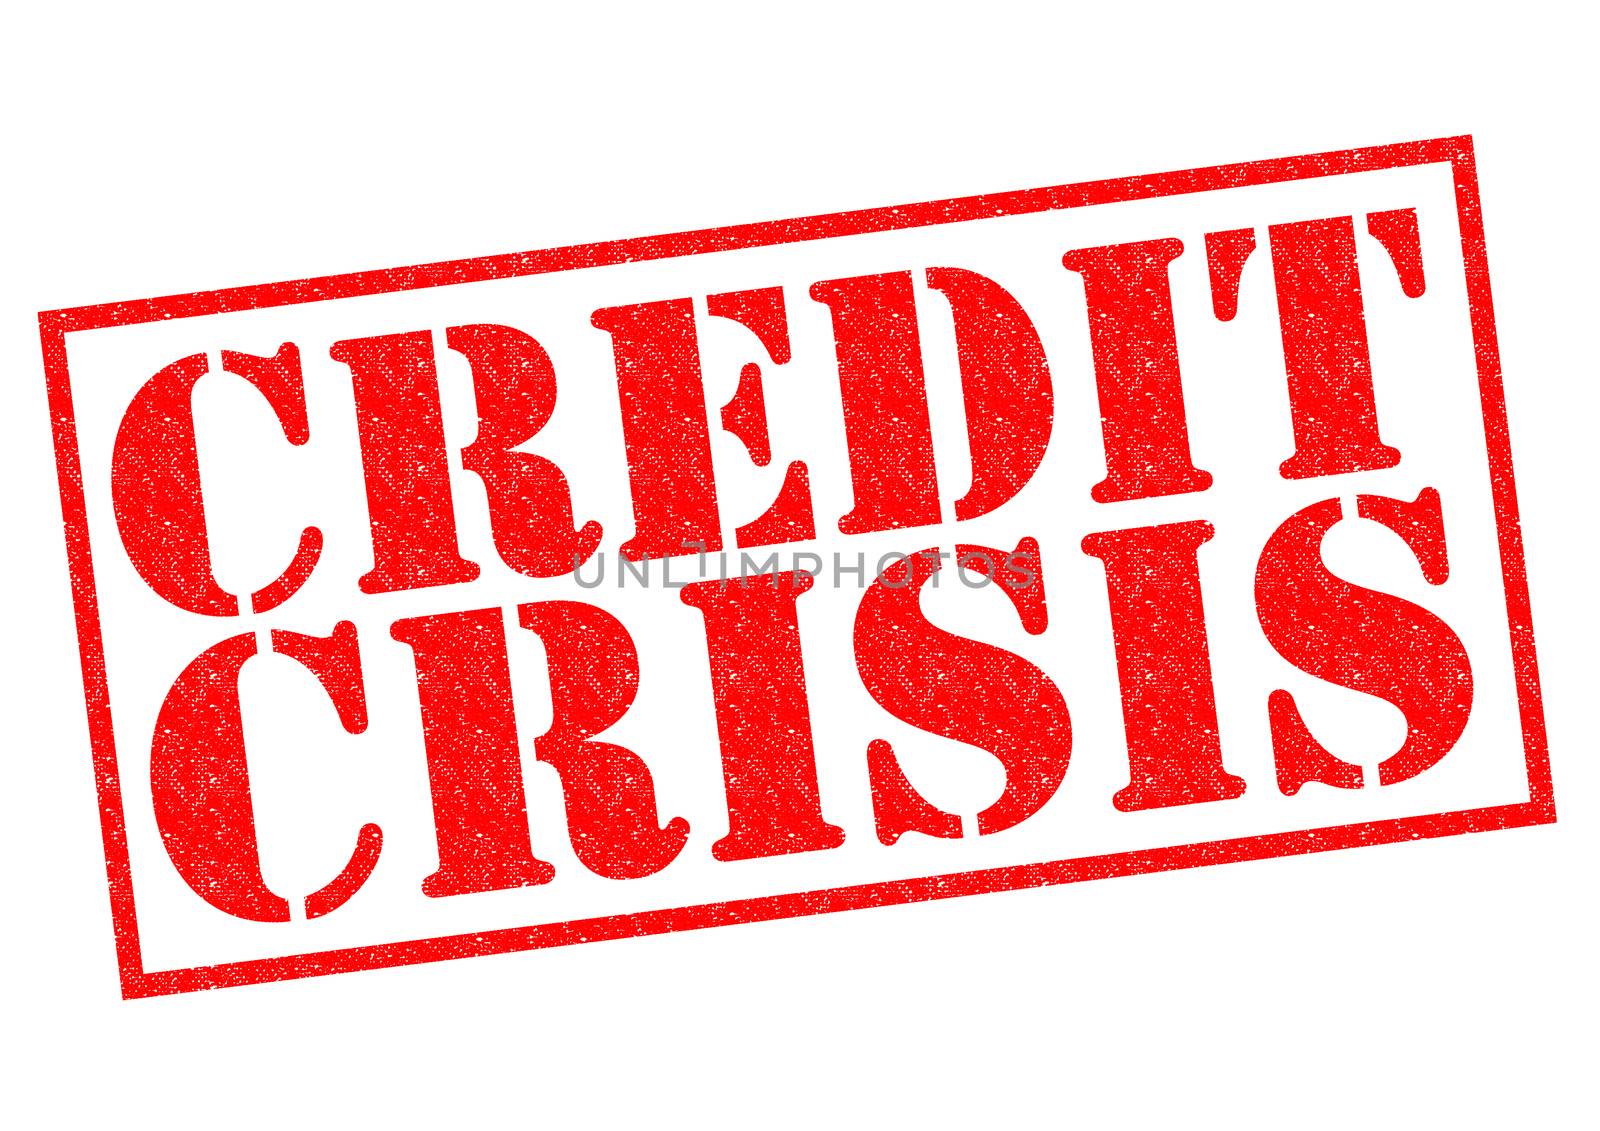 CREDIT CRISIS red Rubber stamp over a white background.